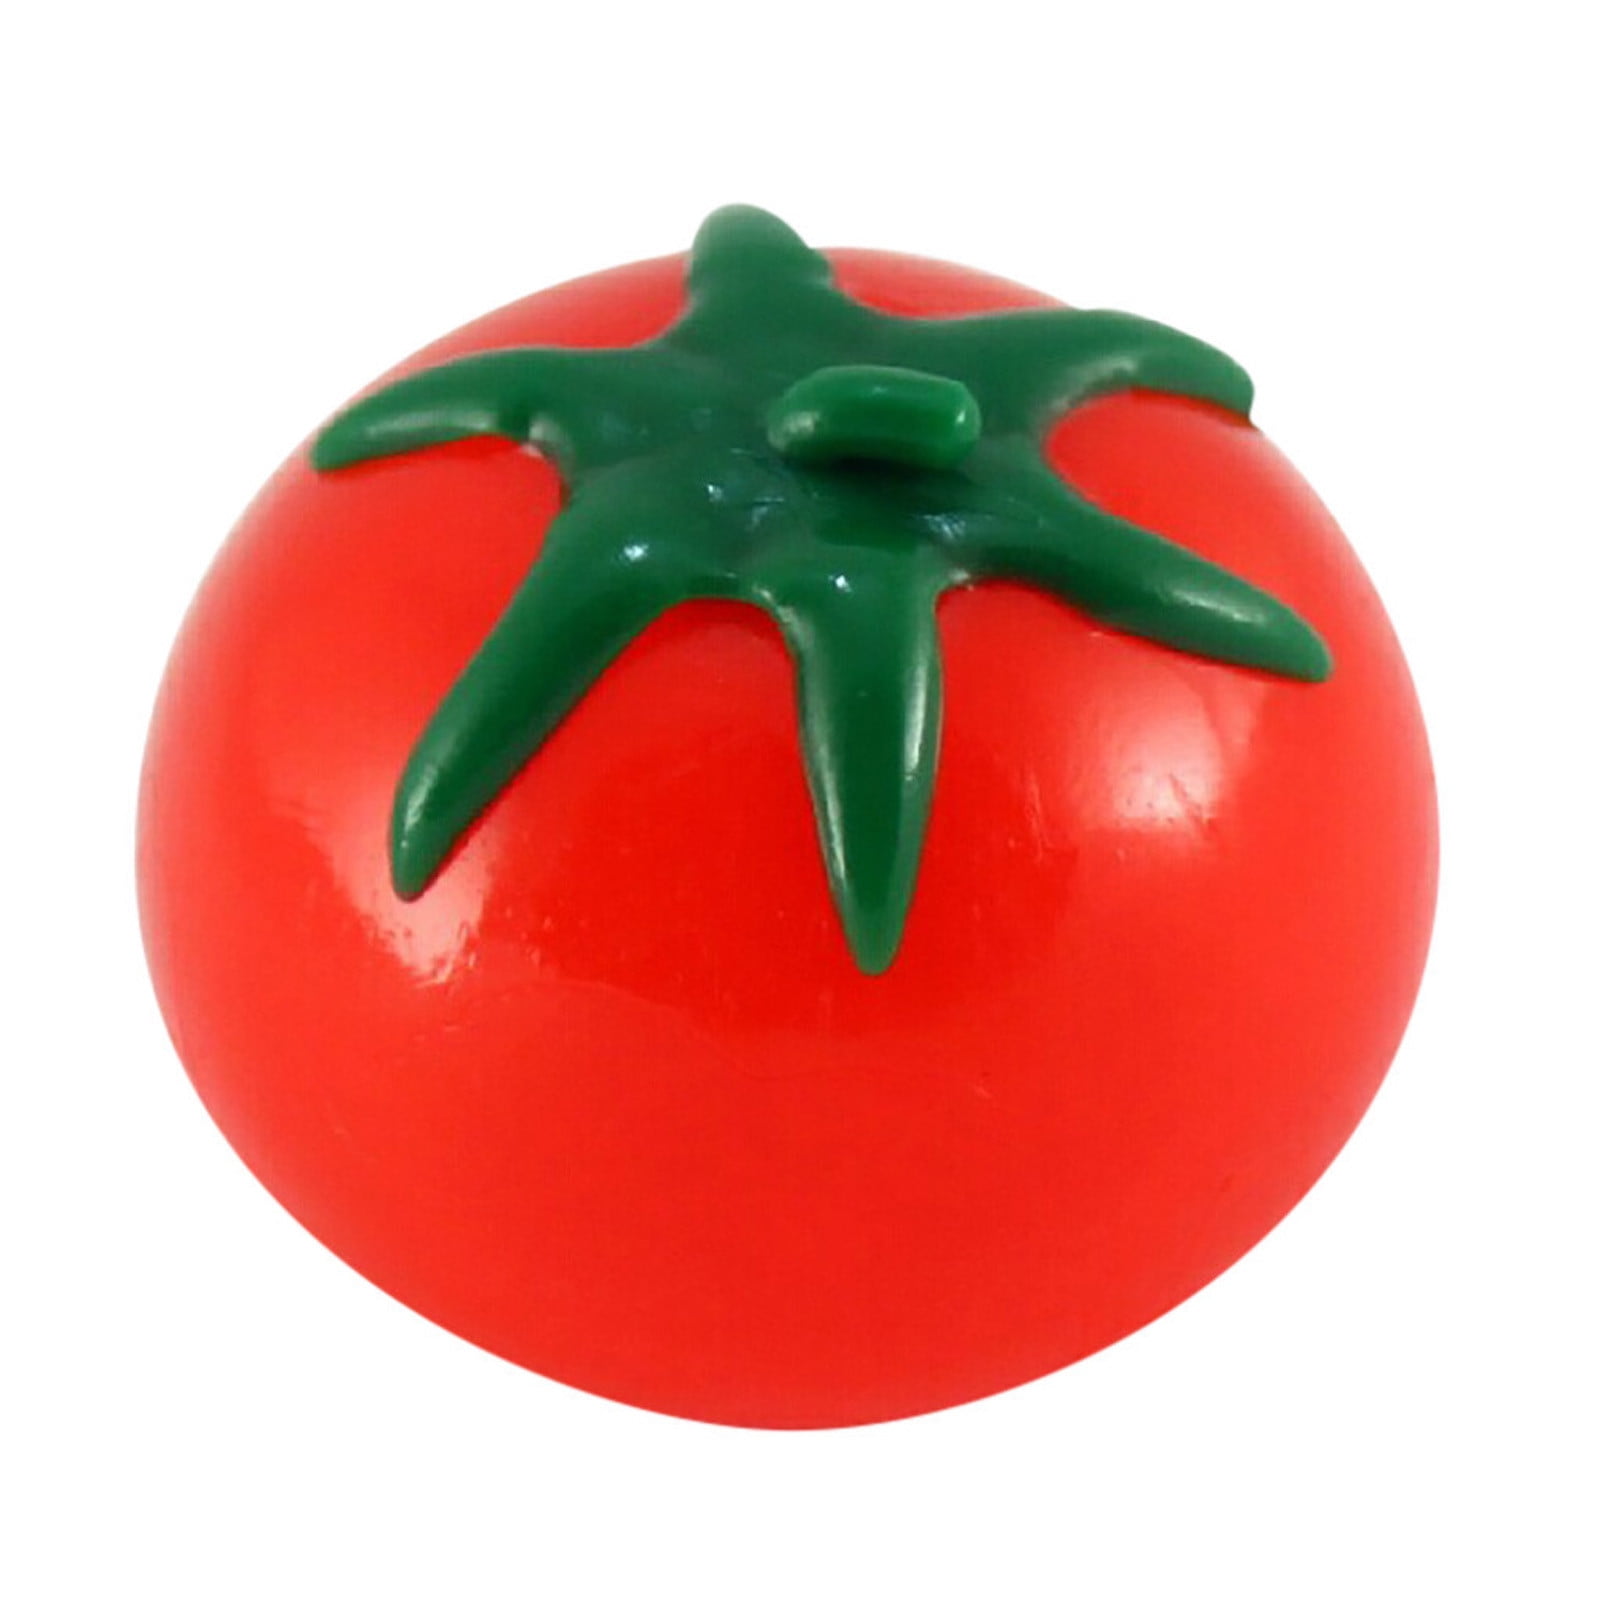 Toy Tomatoes Squishy Imitation Tomatoes Stress Relieve Tomato Vent Water Ball TPR Materials Most Interesting Play Tricks Relieve Pressure Soft and Comfortable Strong Memory Function Amazing Viscosity 